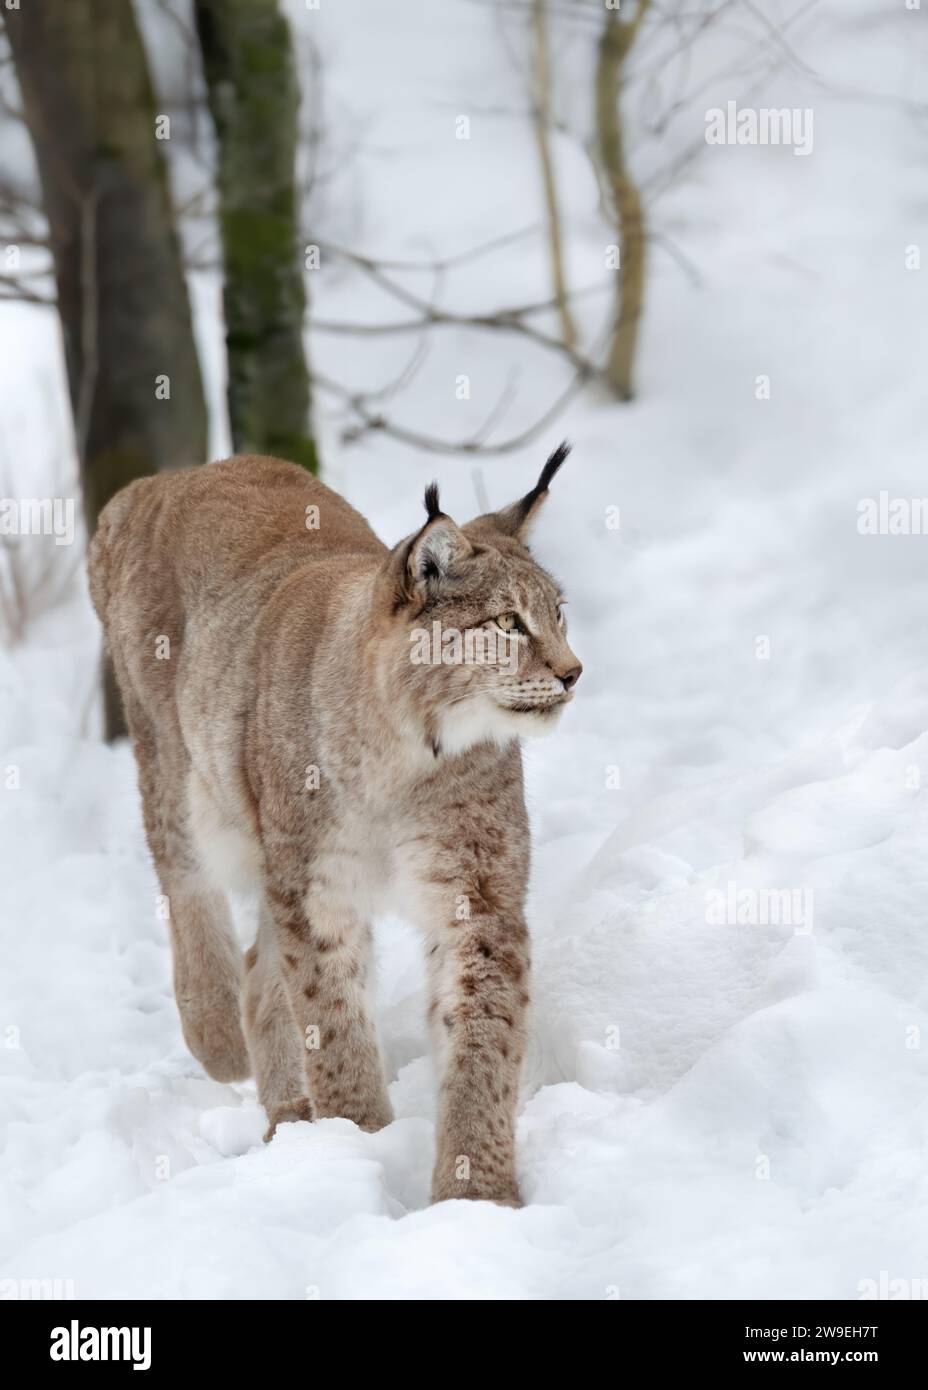 A lynx walking through deep snow in the forest looking to the side, vertical Stock Photo